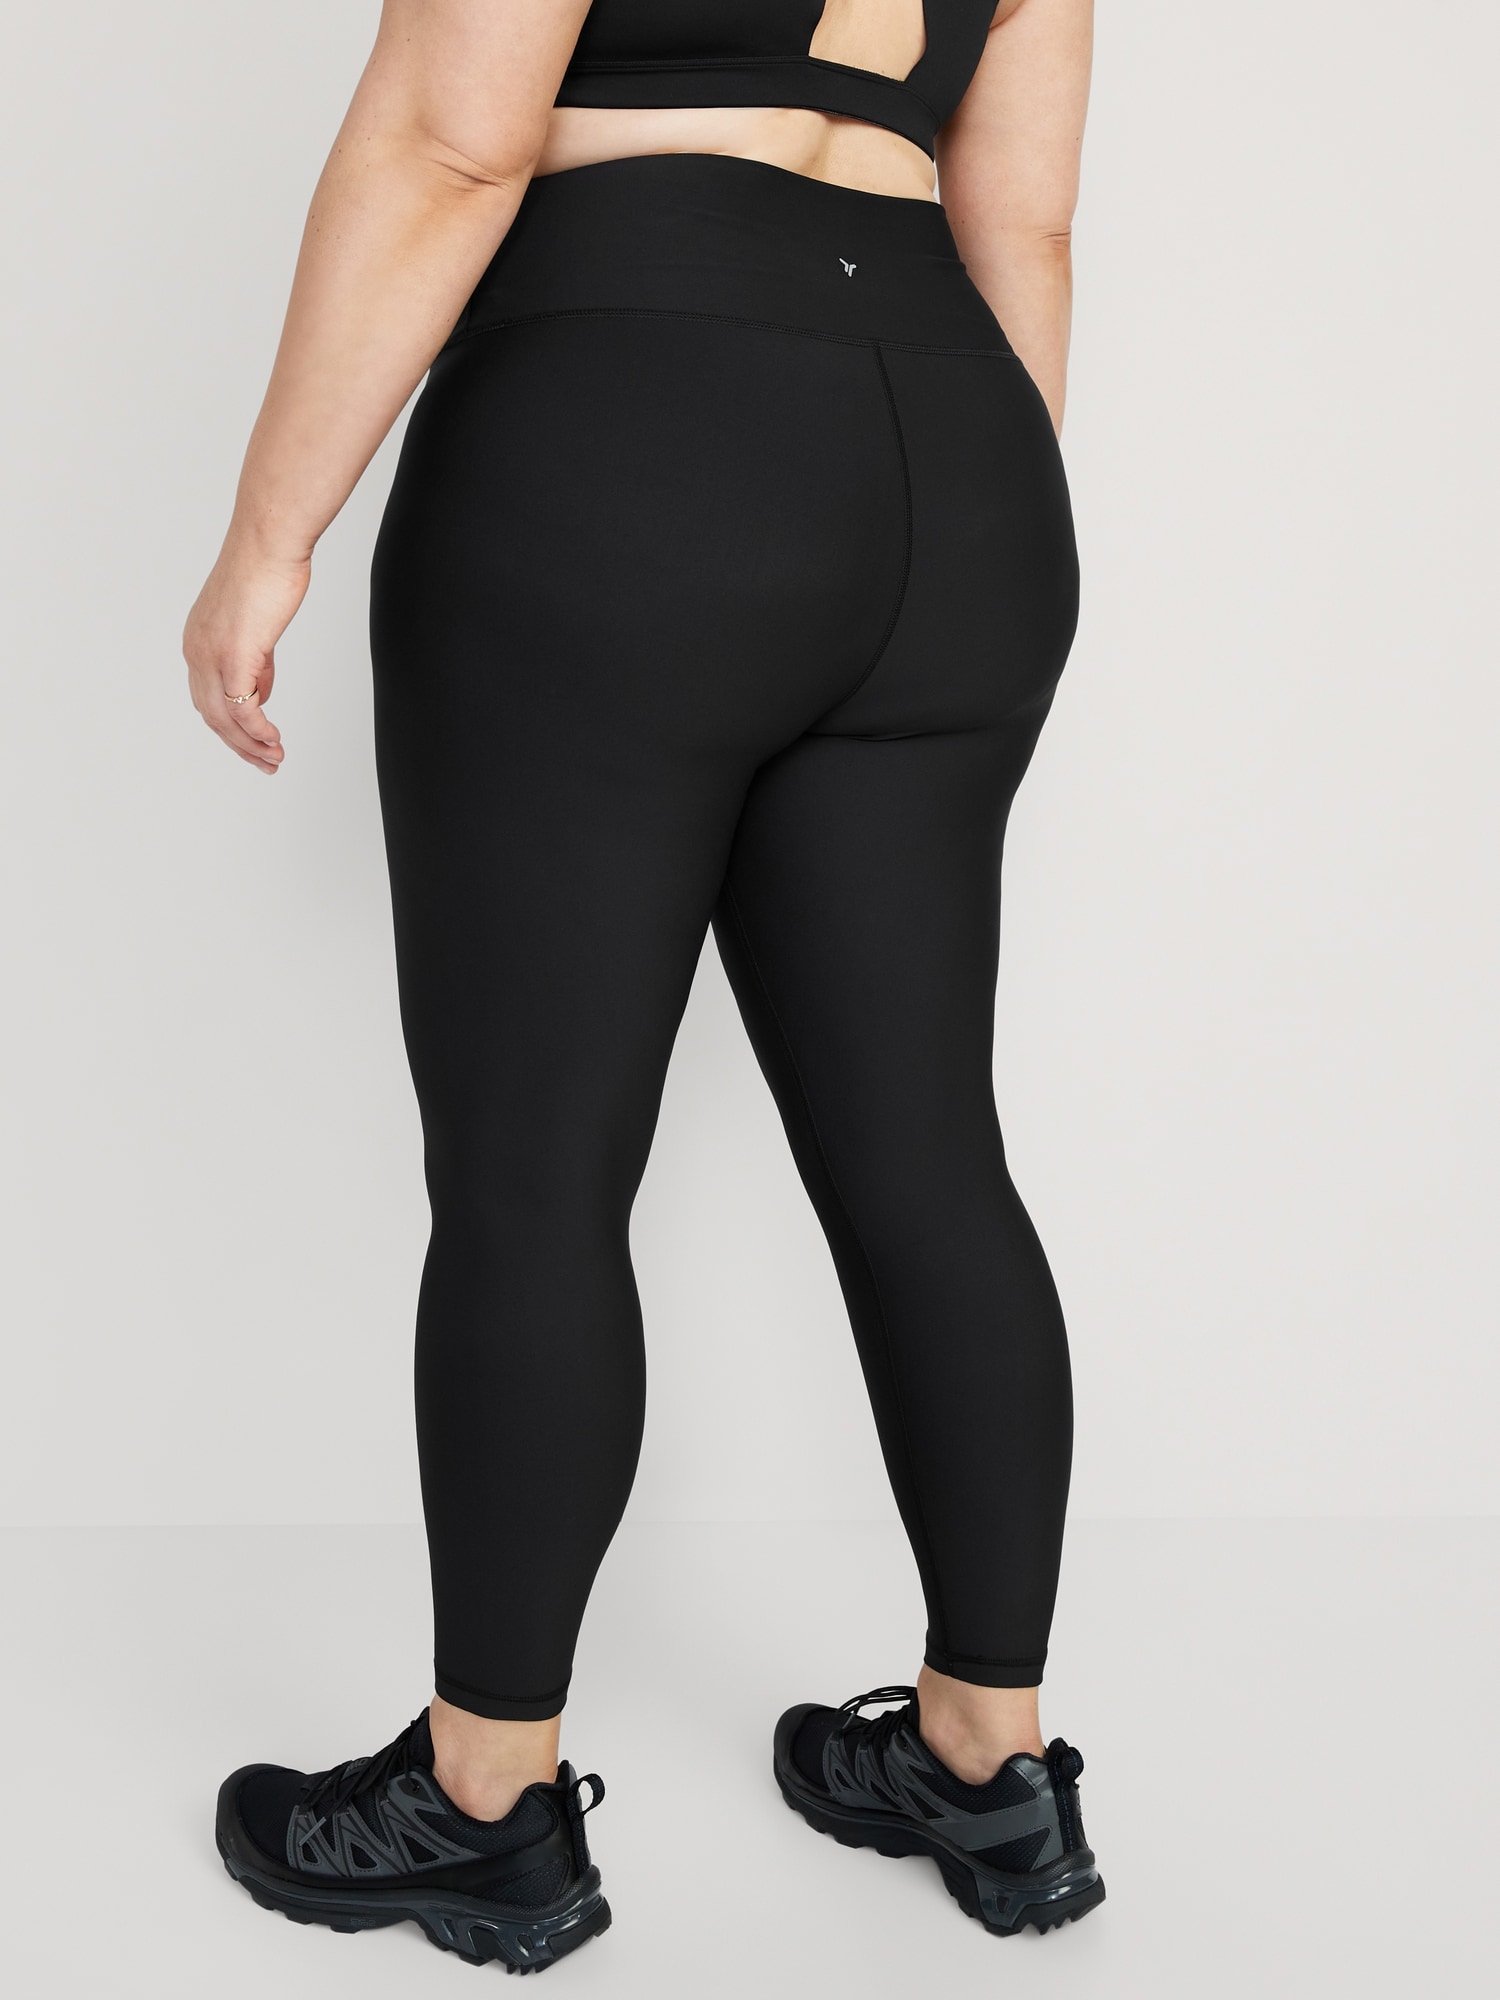 High-Waisted PowerSoft 7/8 Leggings | Old Navy